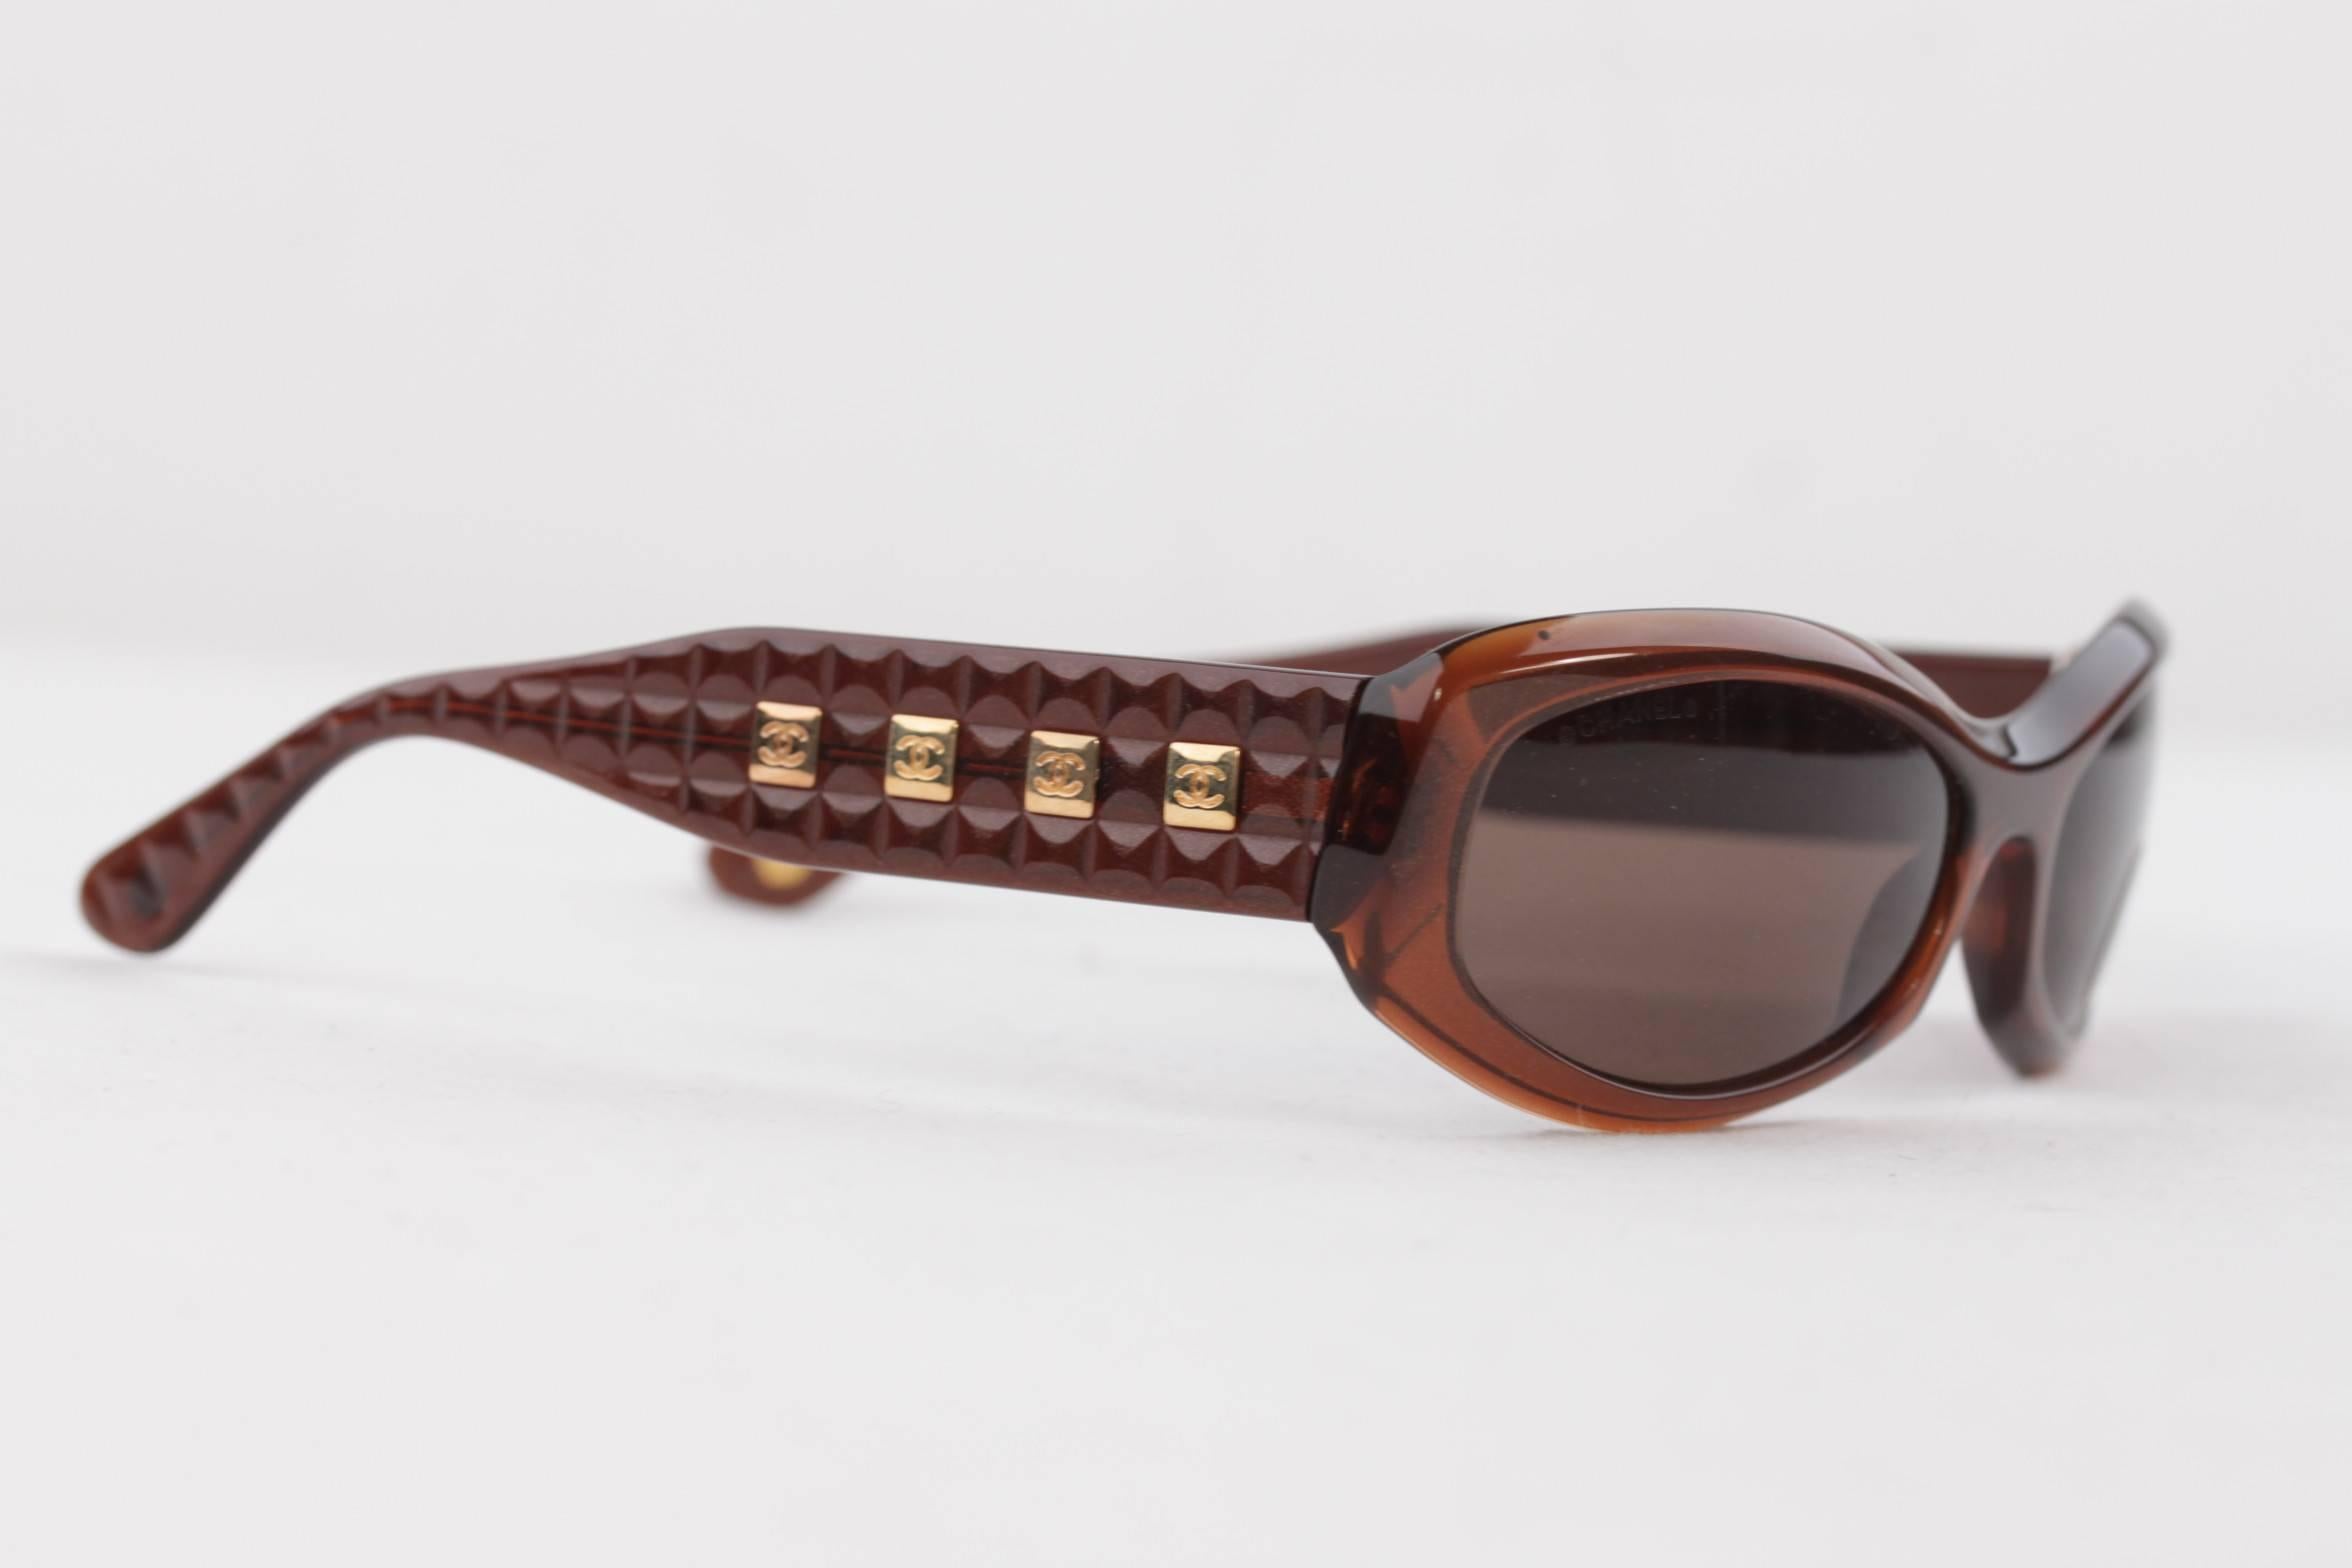 CHANEL Brown SUNGLASSES 5029 c.612 56/18 135 Women QUILTED Frame w/CASE &  SERIAL